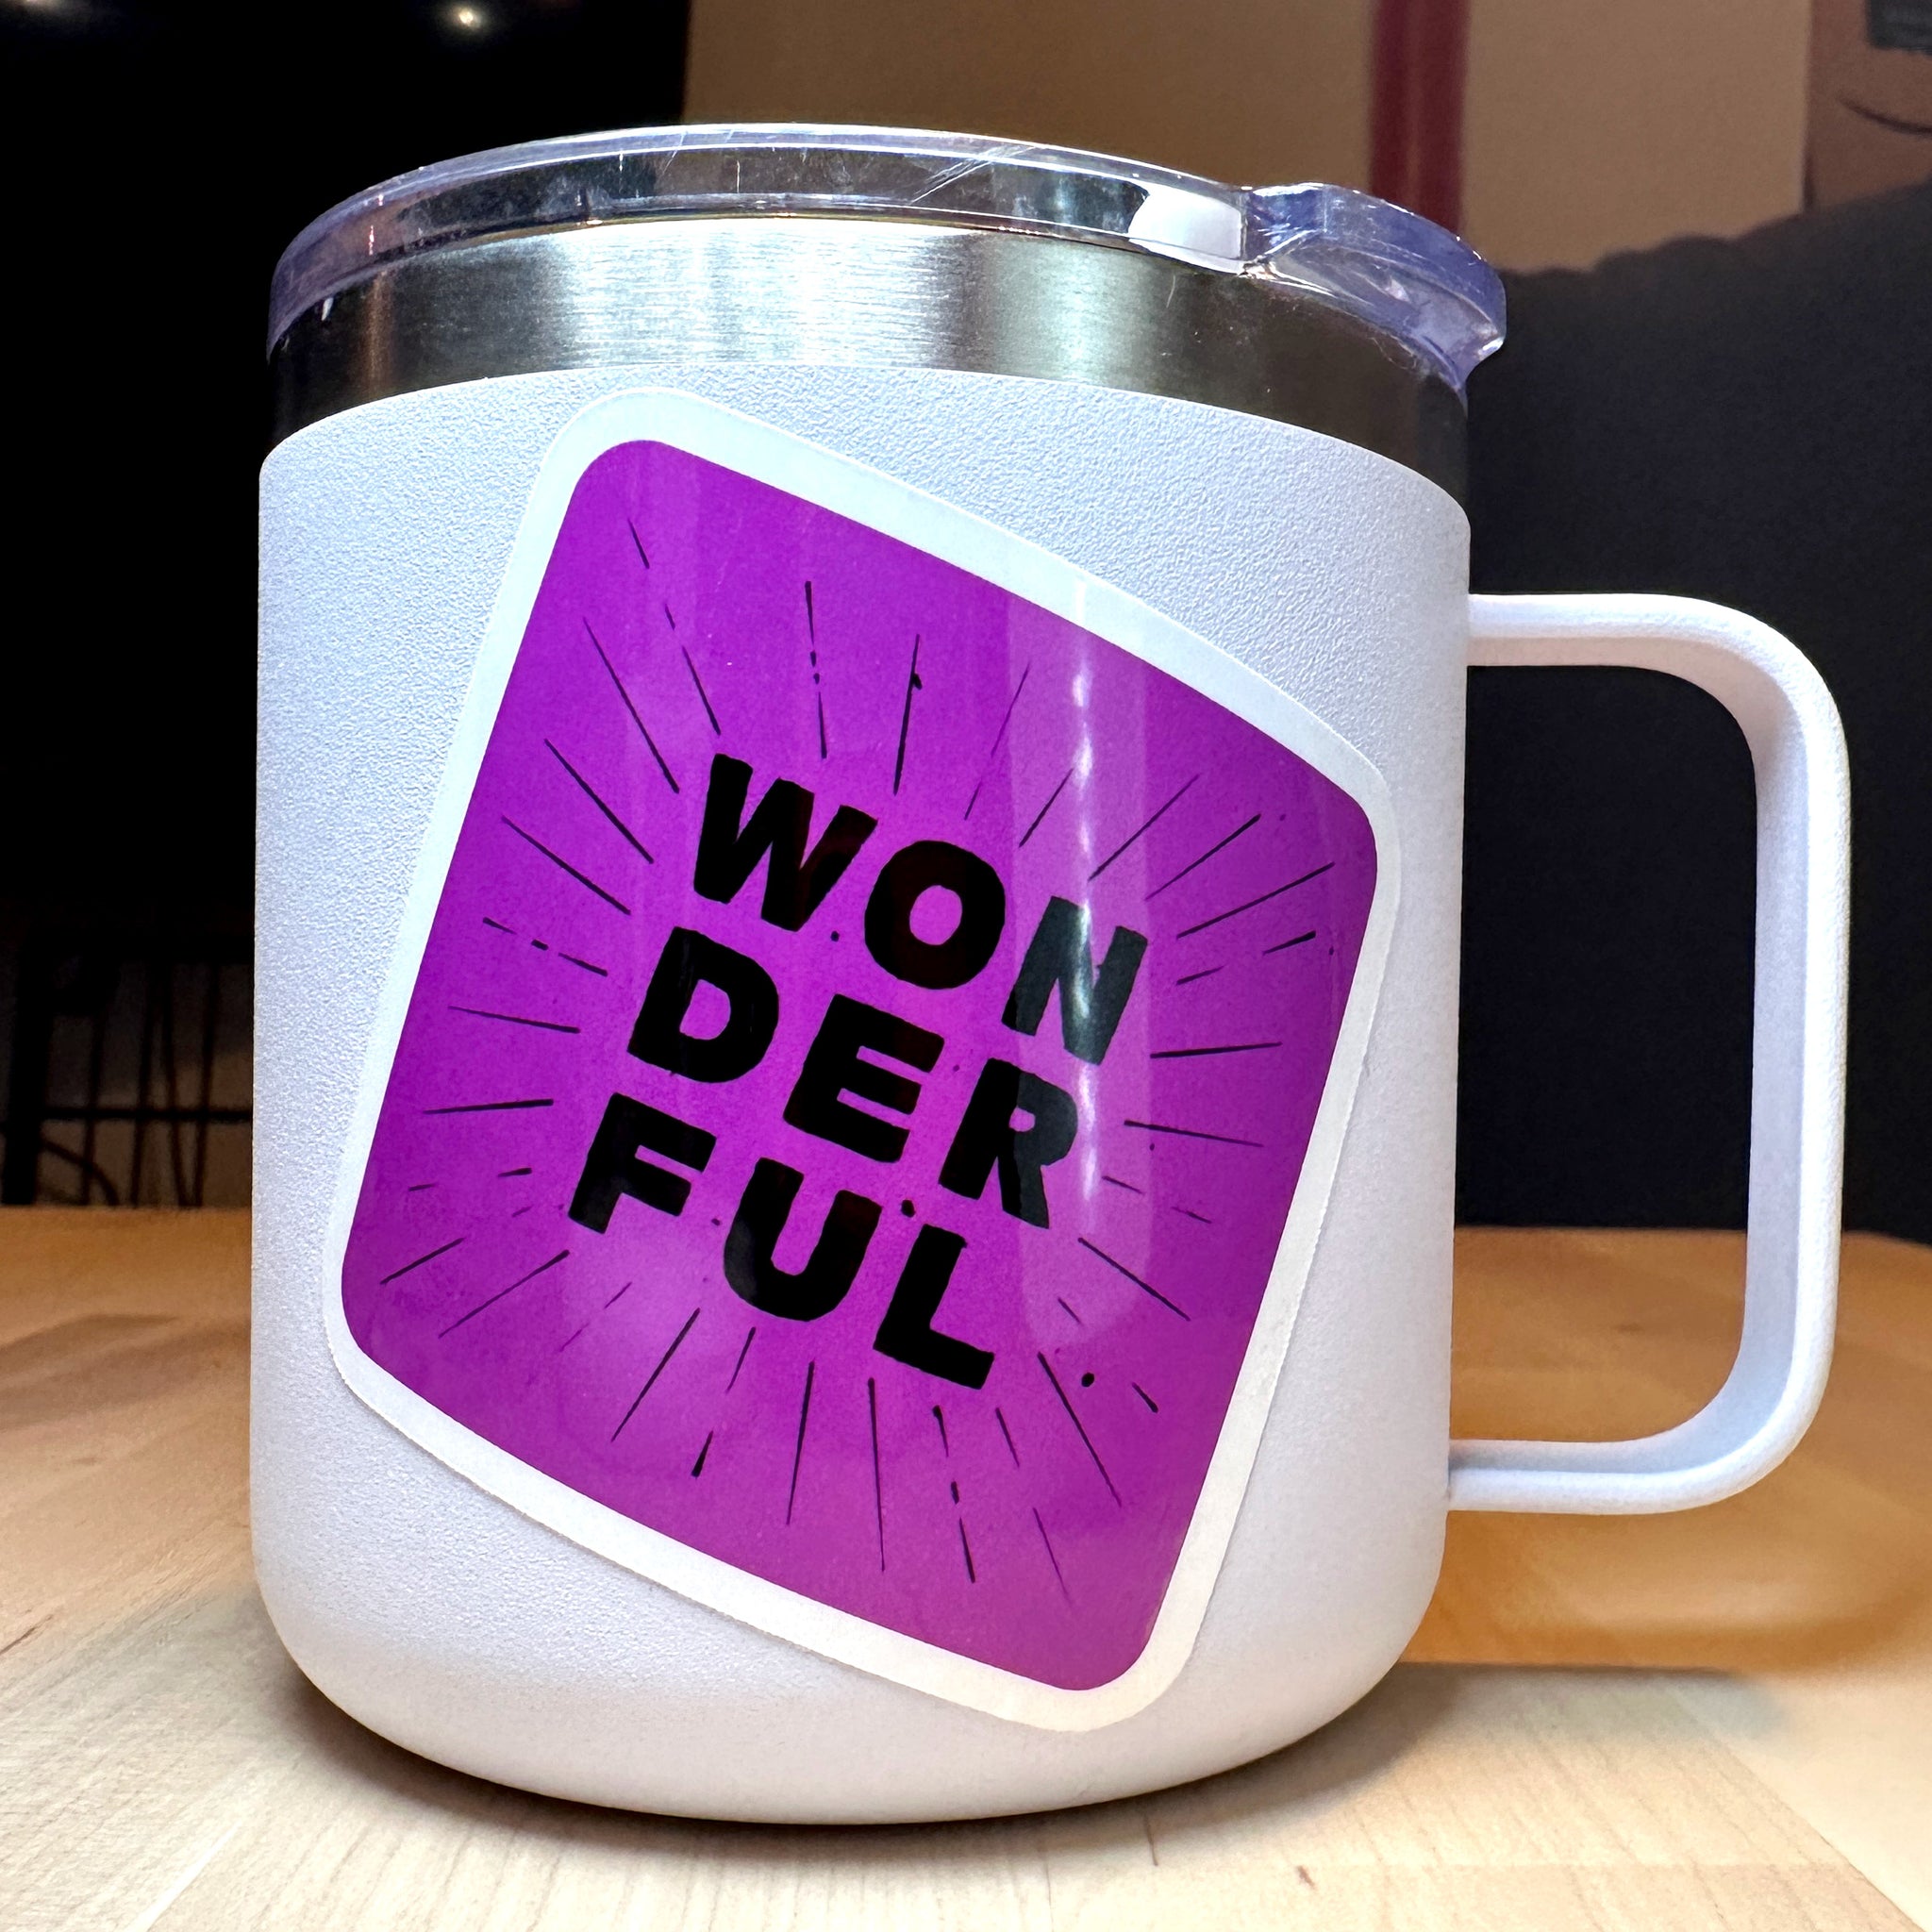 photo of waterproof vinyl sticker with the word wonderful in 3 layers of black text on purple background on a white mug